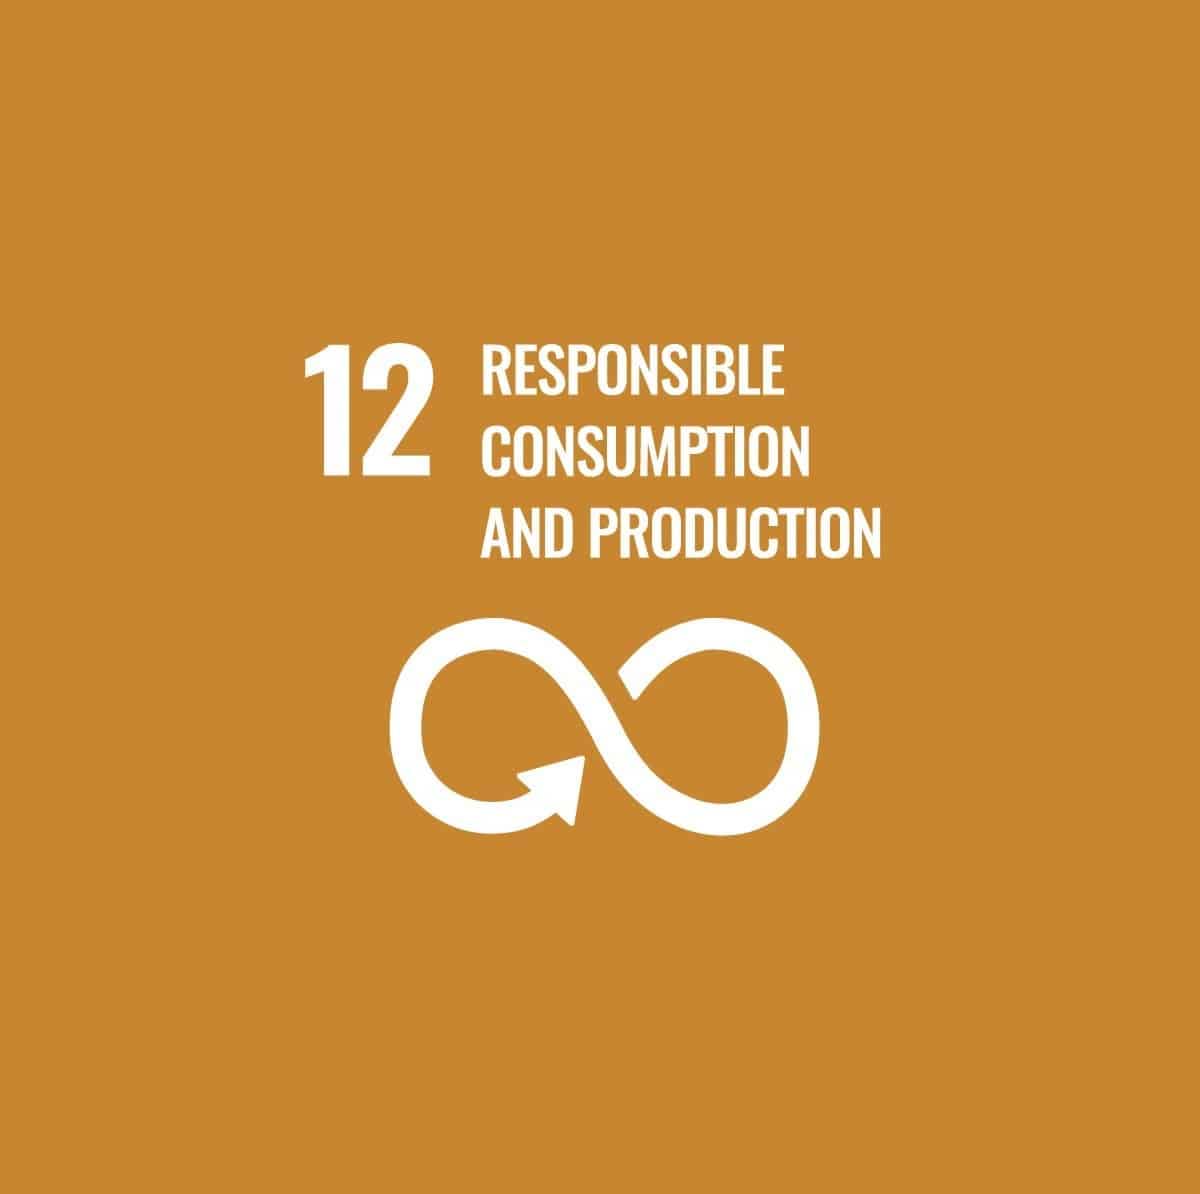 The United Nations Sustainable Development Goal 12